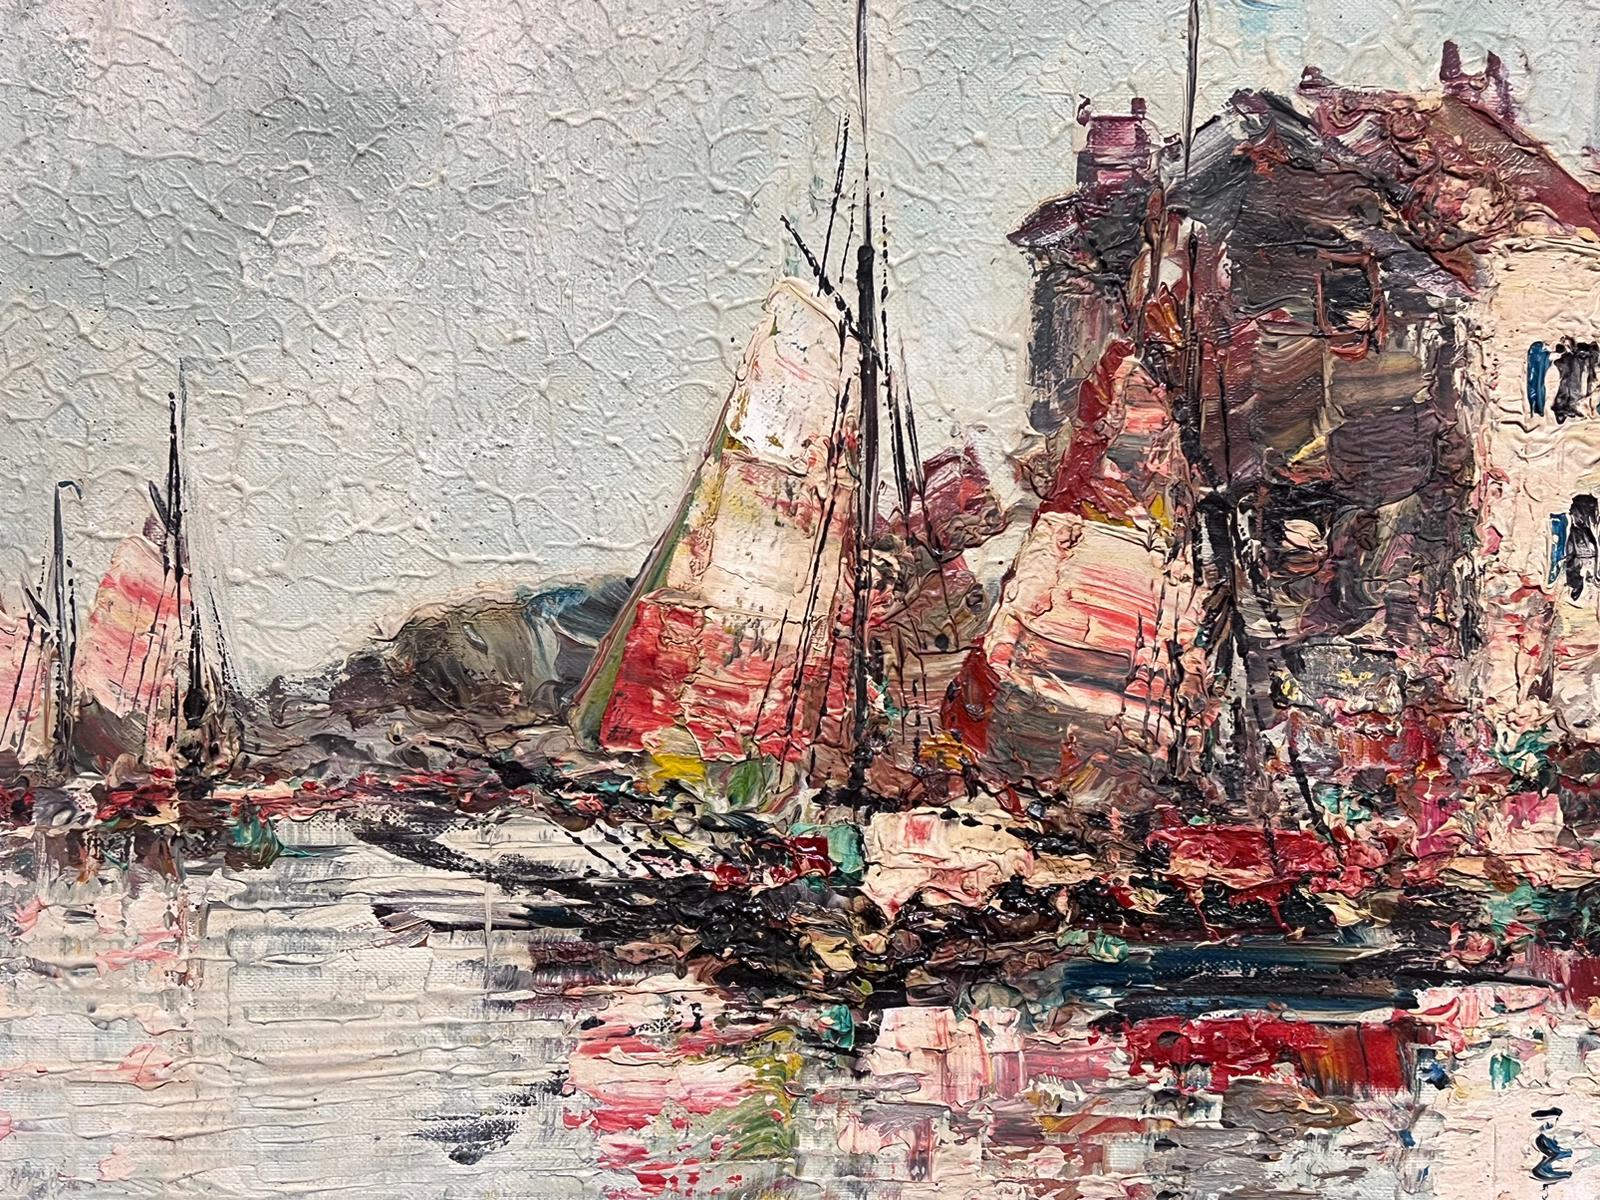 St Tropez Harbour
French Post Impressionist artist, mid 20th century
signed oil on canvas, unframed
canvas: 20 x 24 inches
provenance: private collection, France
condition: overall good and sound condition 